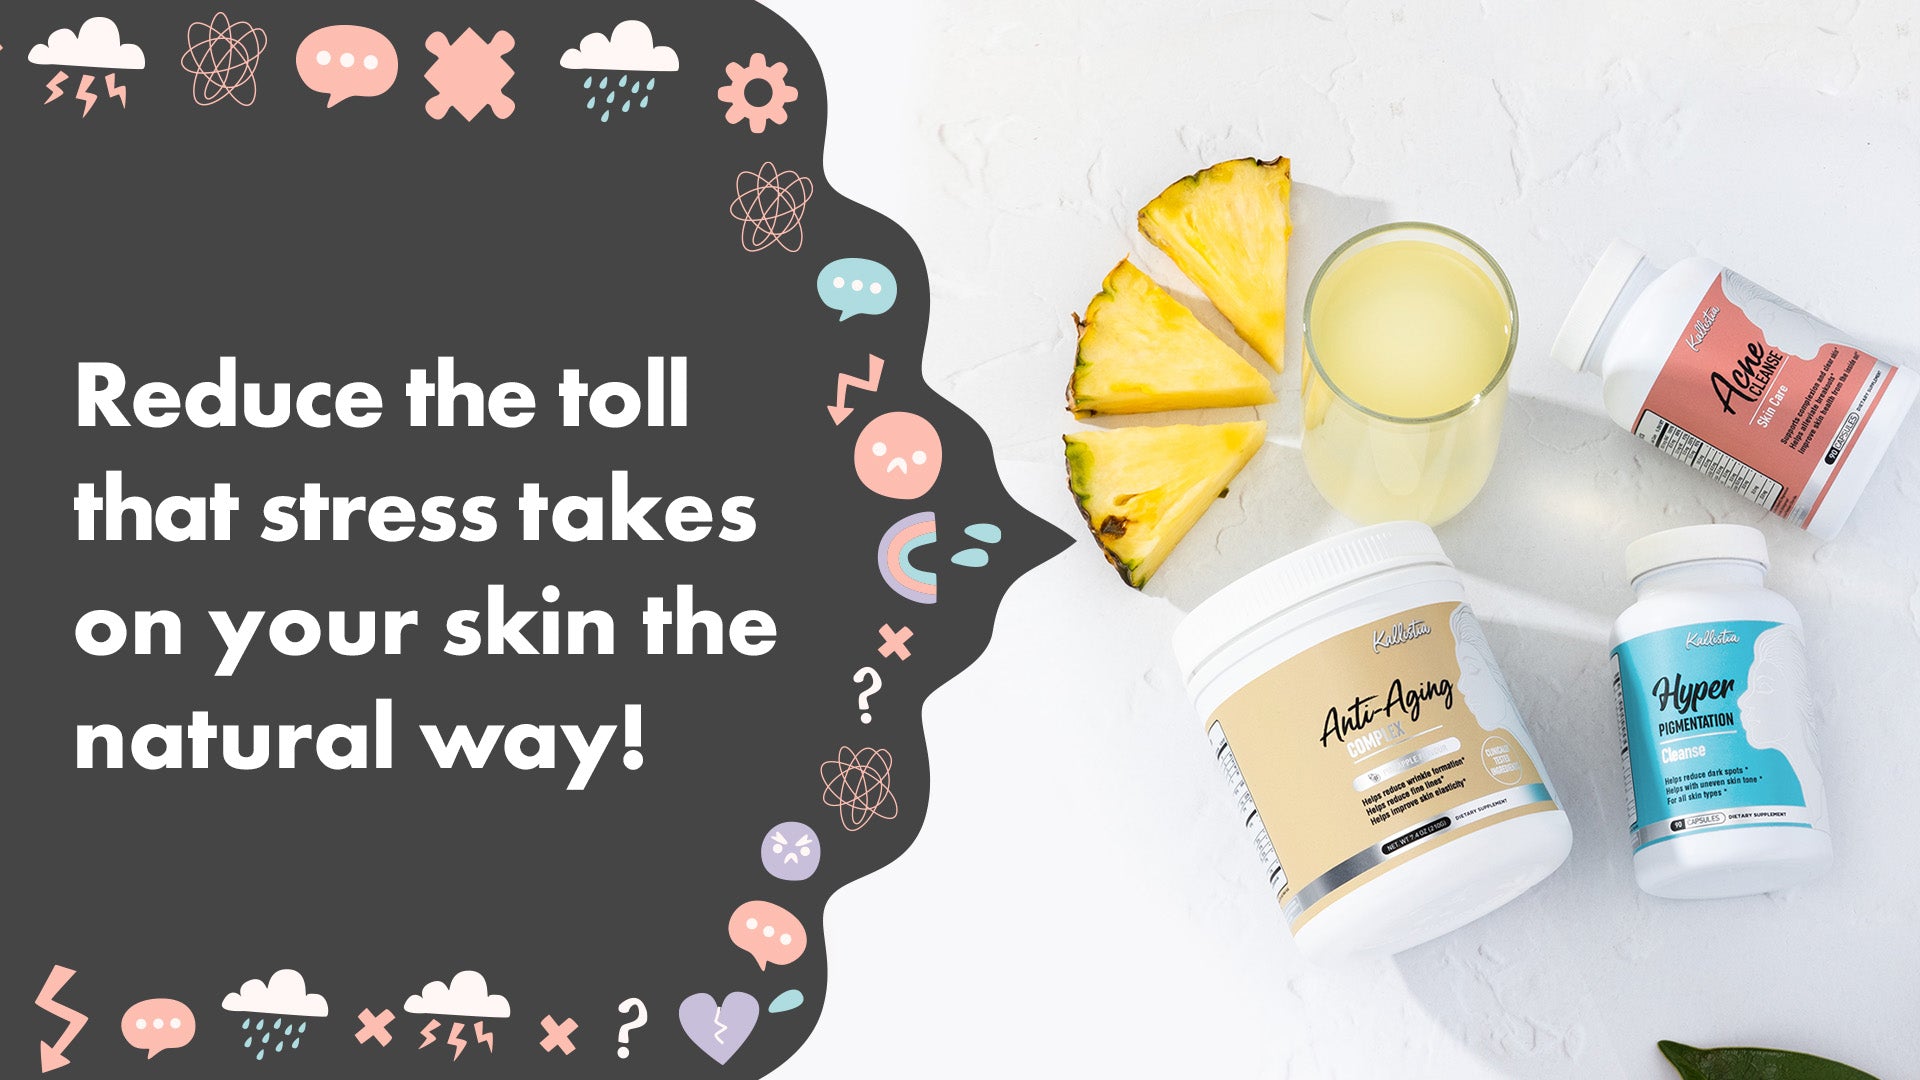 Reduce the toll that stress takes on your skin the natural way!